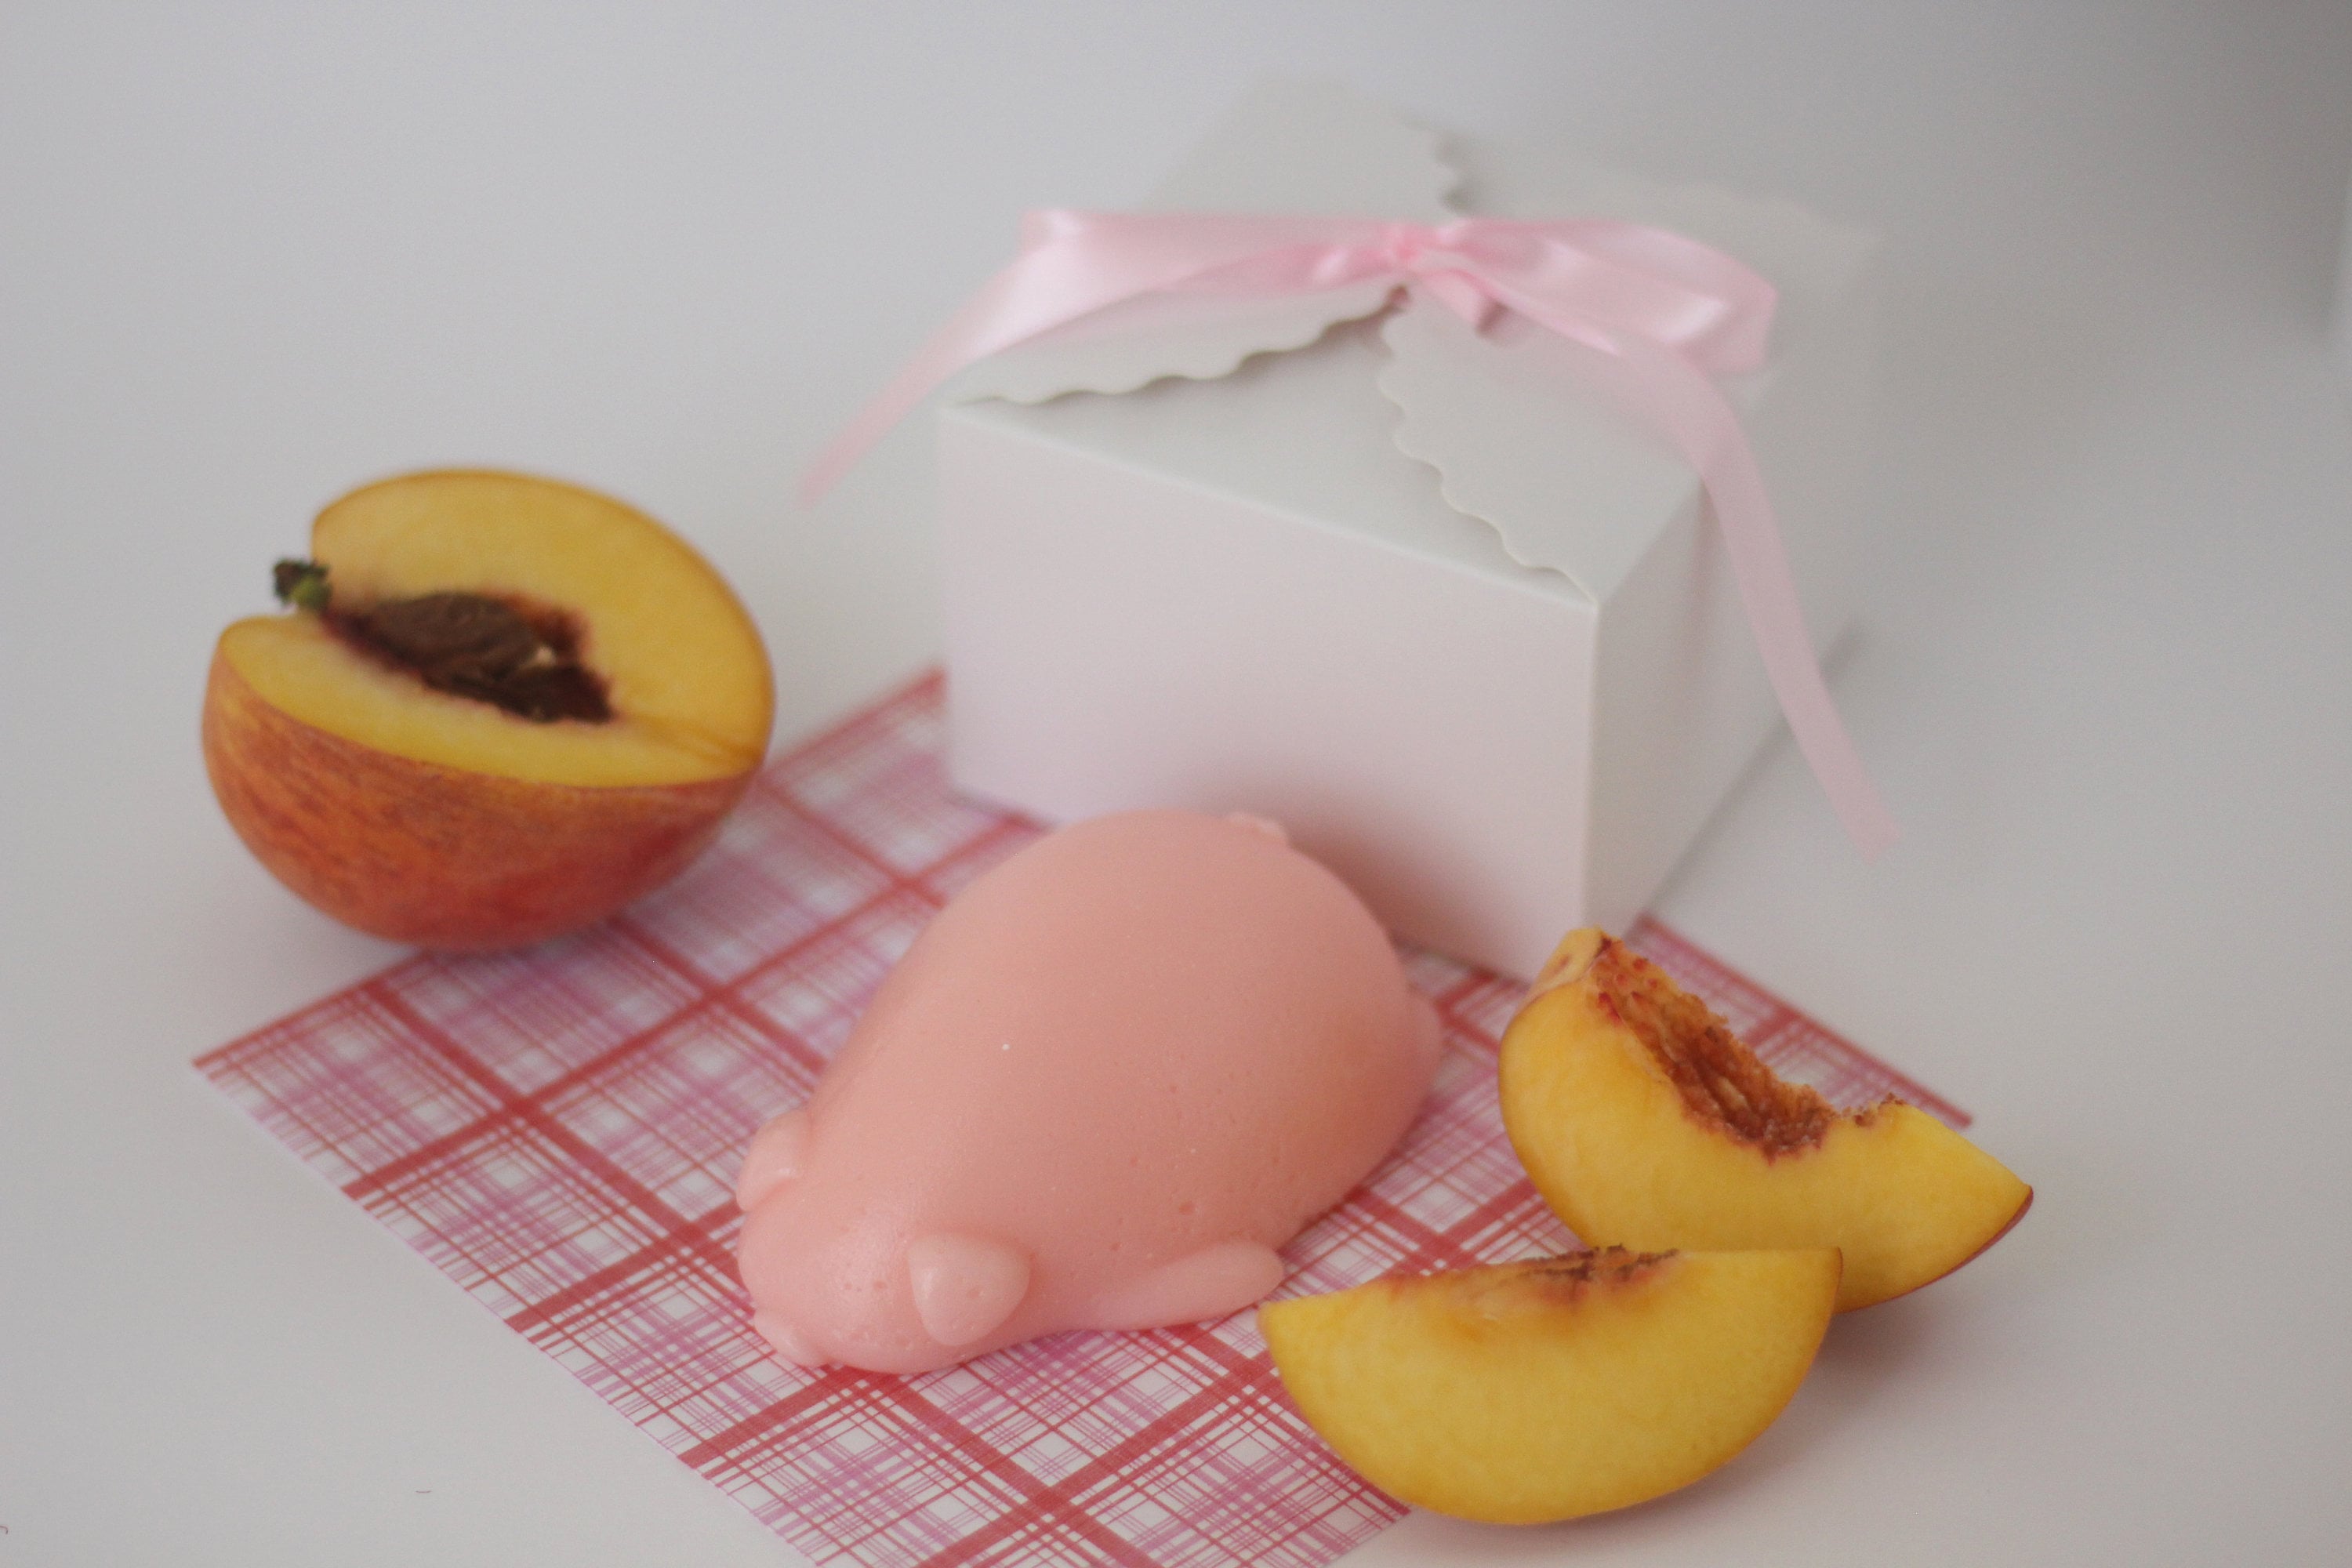 Jelly soap - Gummy Peach Ring soaps – Gilaas Soap